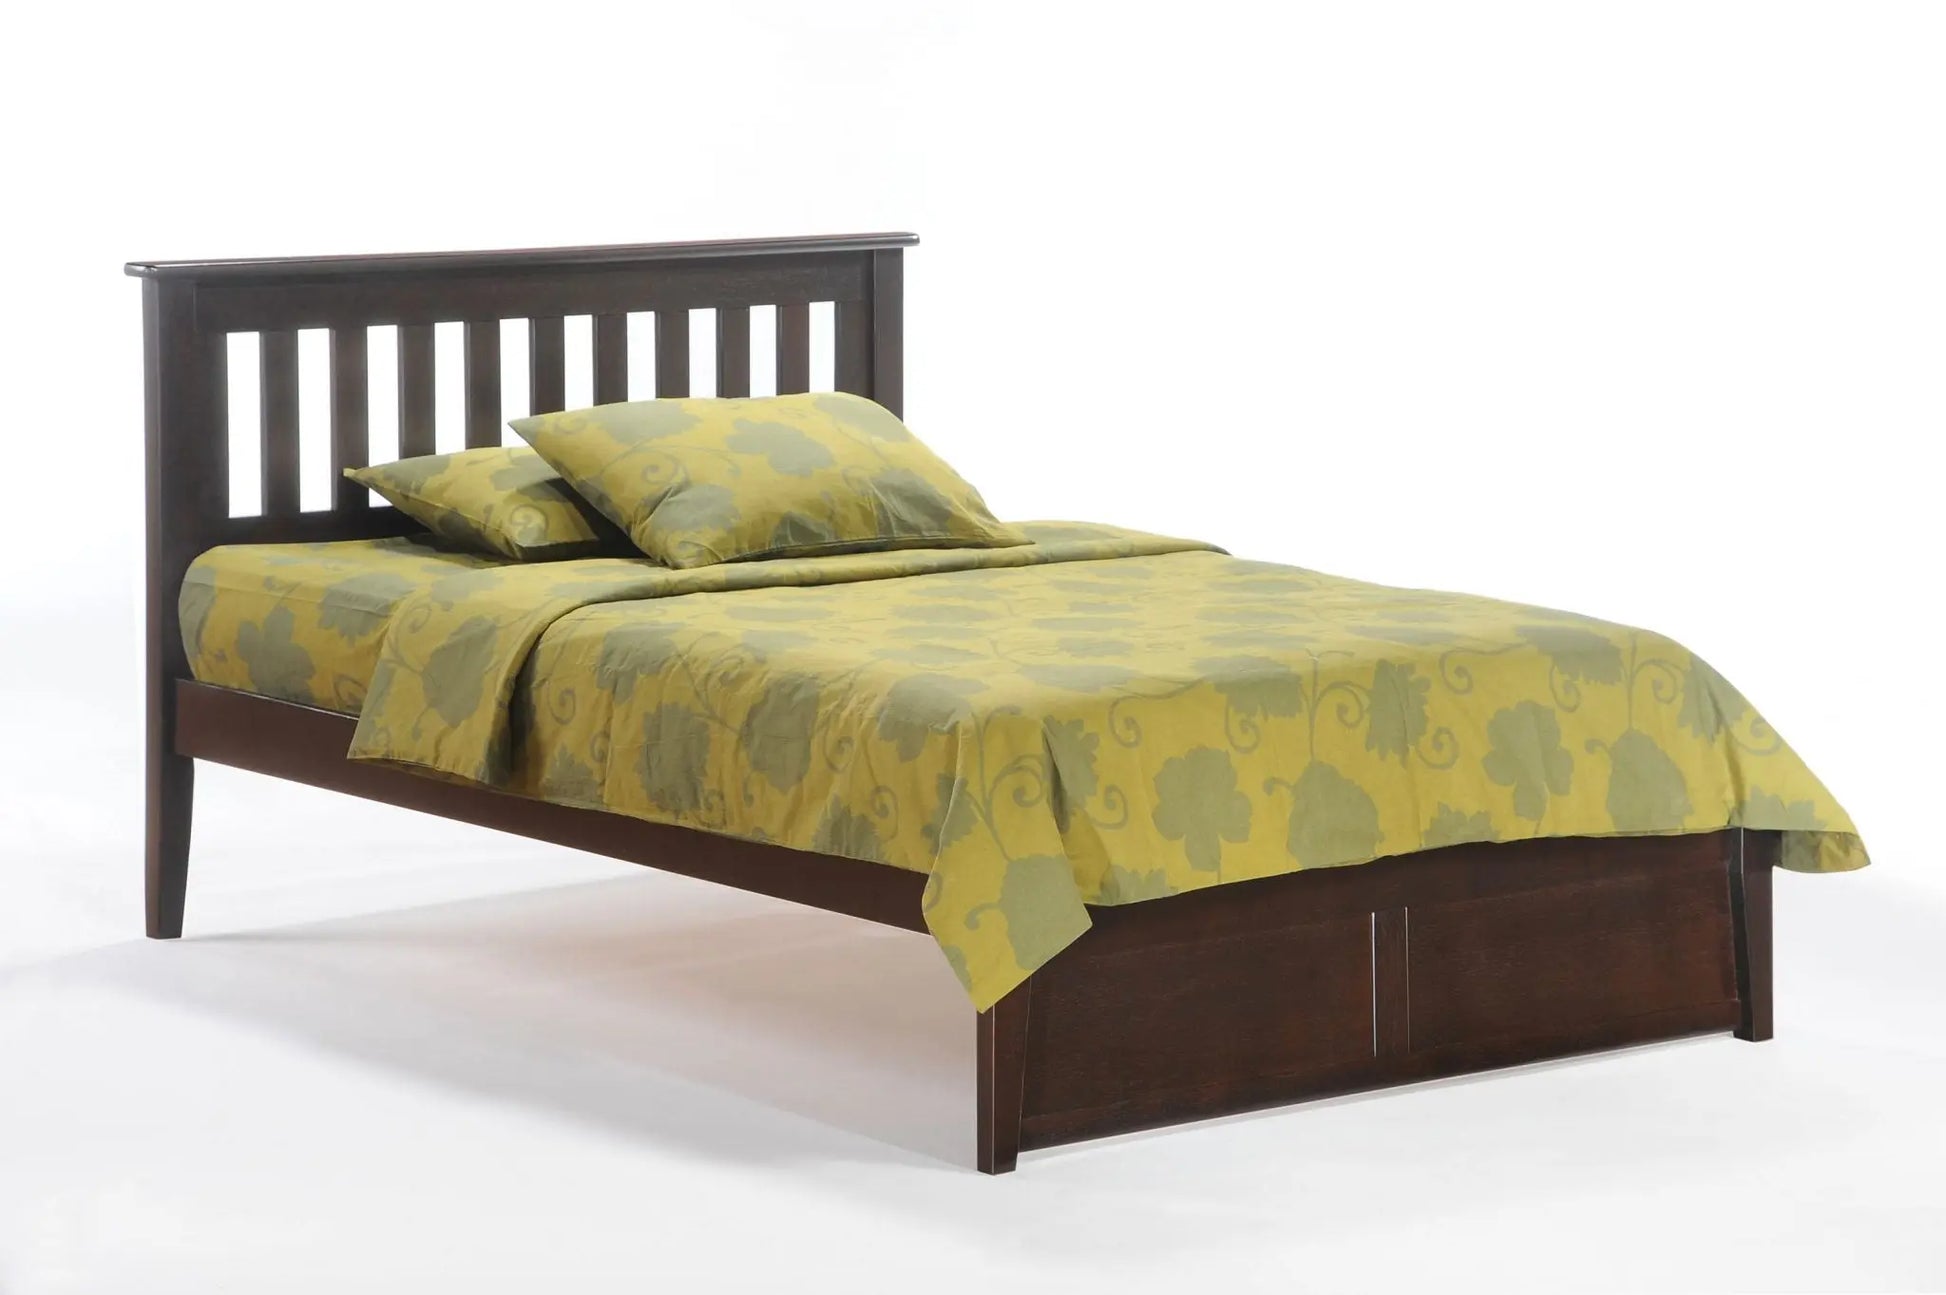 ROSEMARY BED night and day furniture